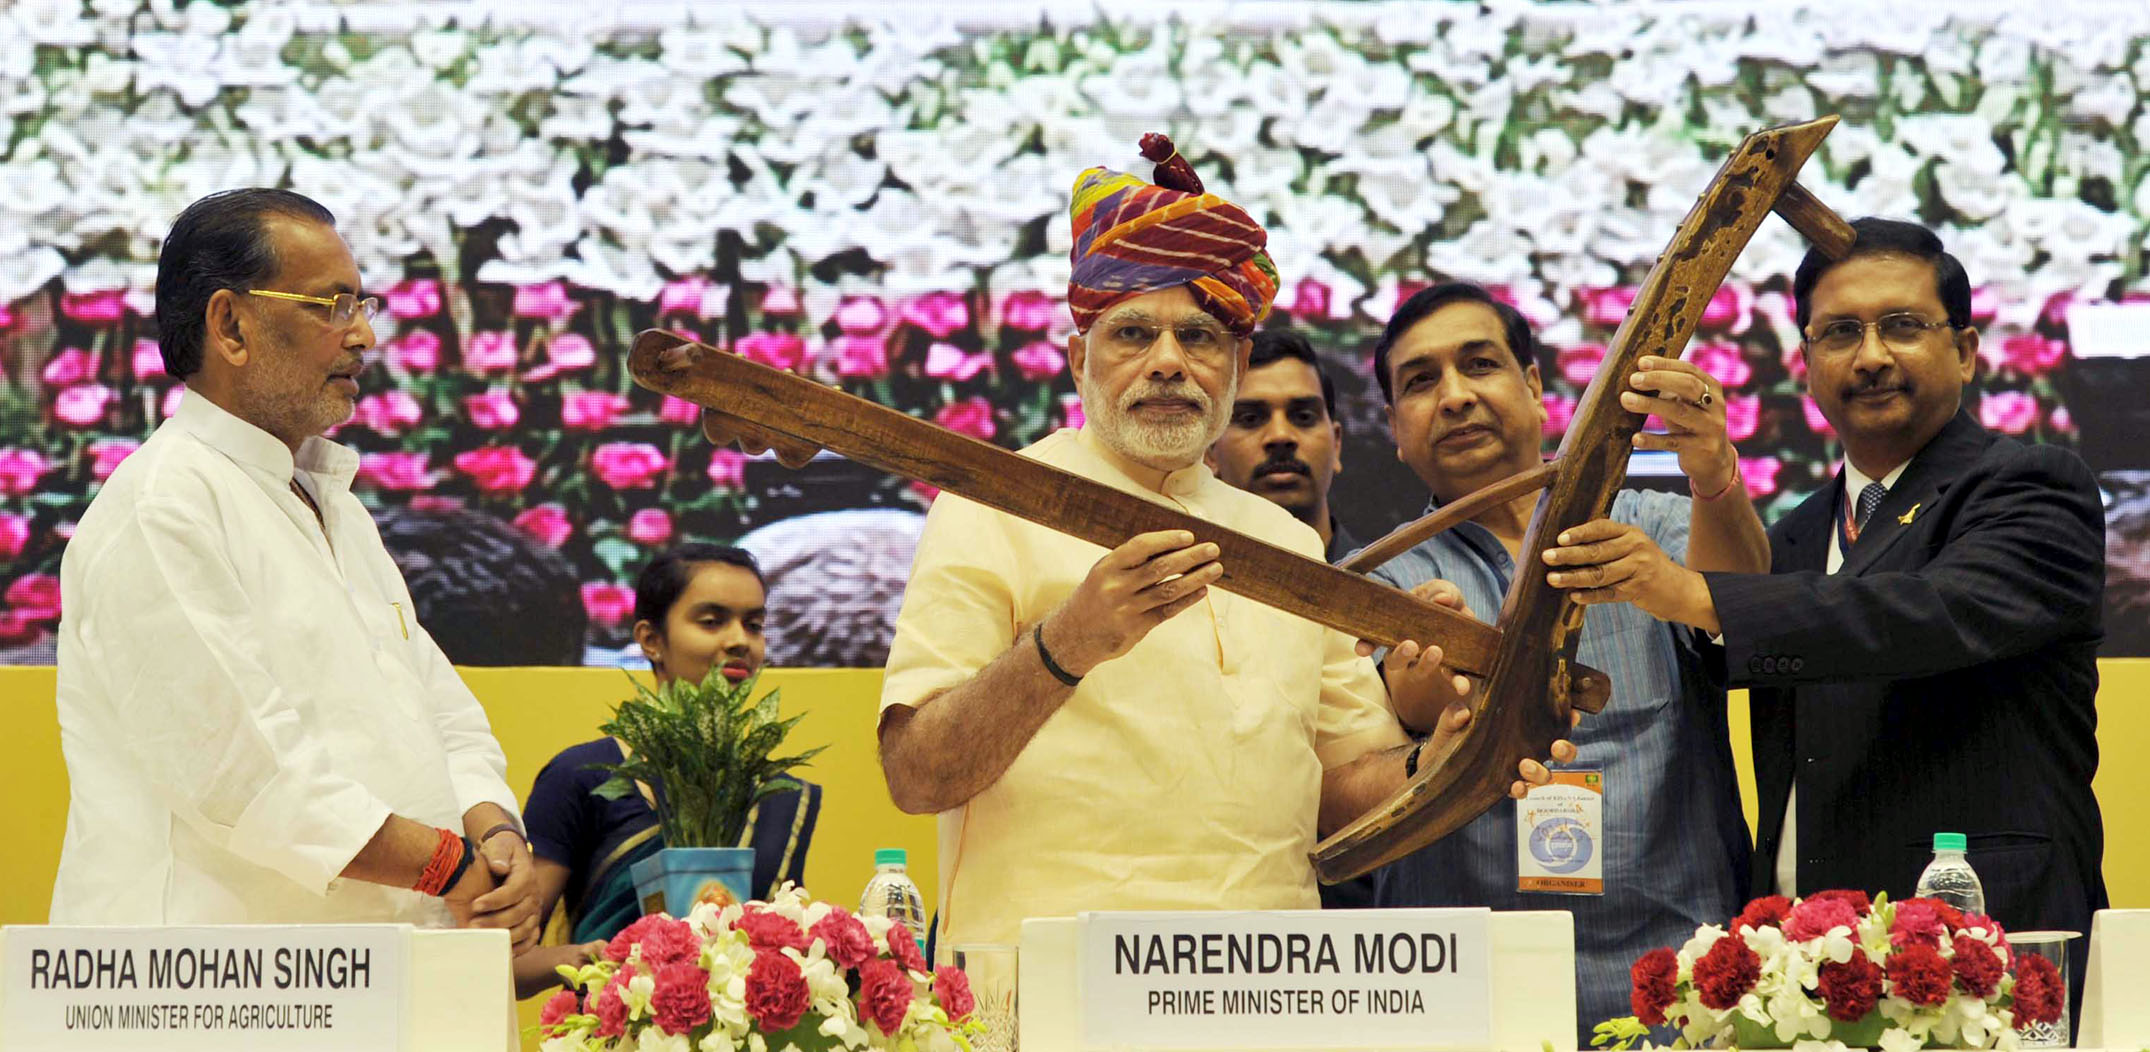 The Prime Minister, Shri Narendra Modi being presented a "Plough" as symbol of farming at the launching ceremony of DD Kisan Channel, in New Delhi on May 26, 2015. The Union Minister for Agriculture, Shri Radha Mohan Singh is also seen.